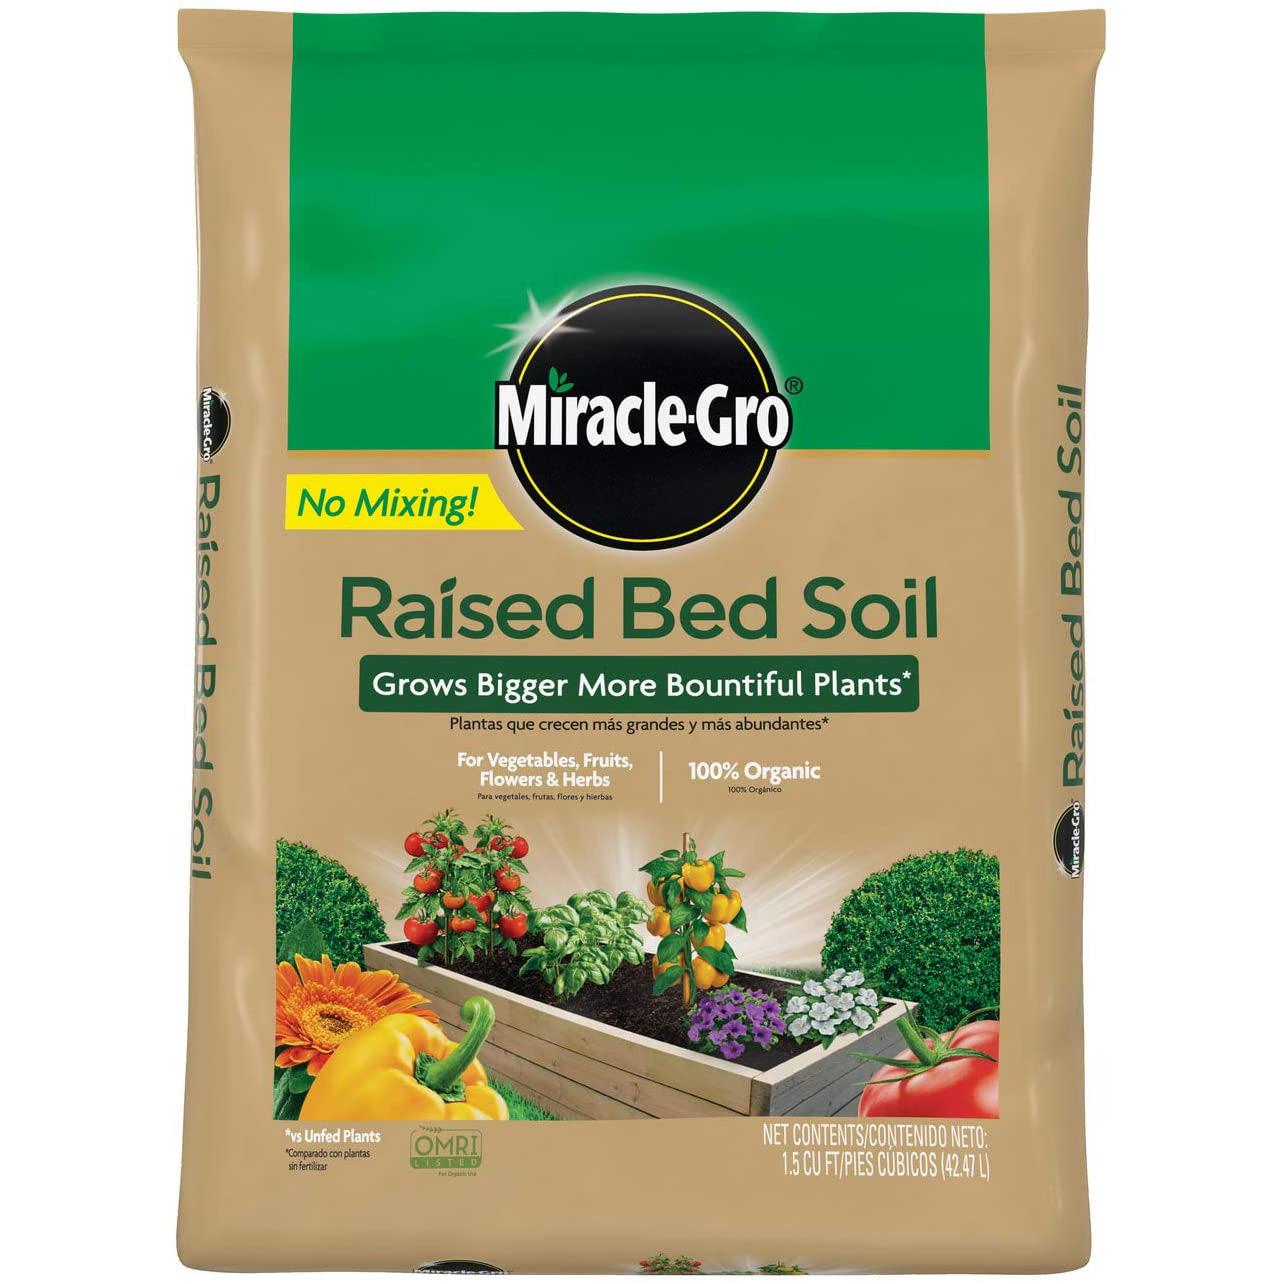 Miracle-Gro Raised Bed Soil for $7